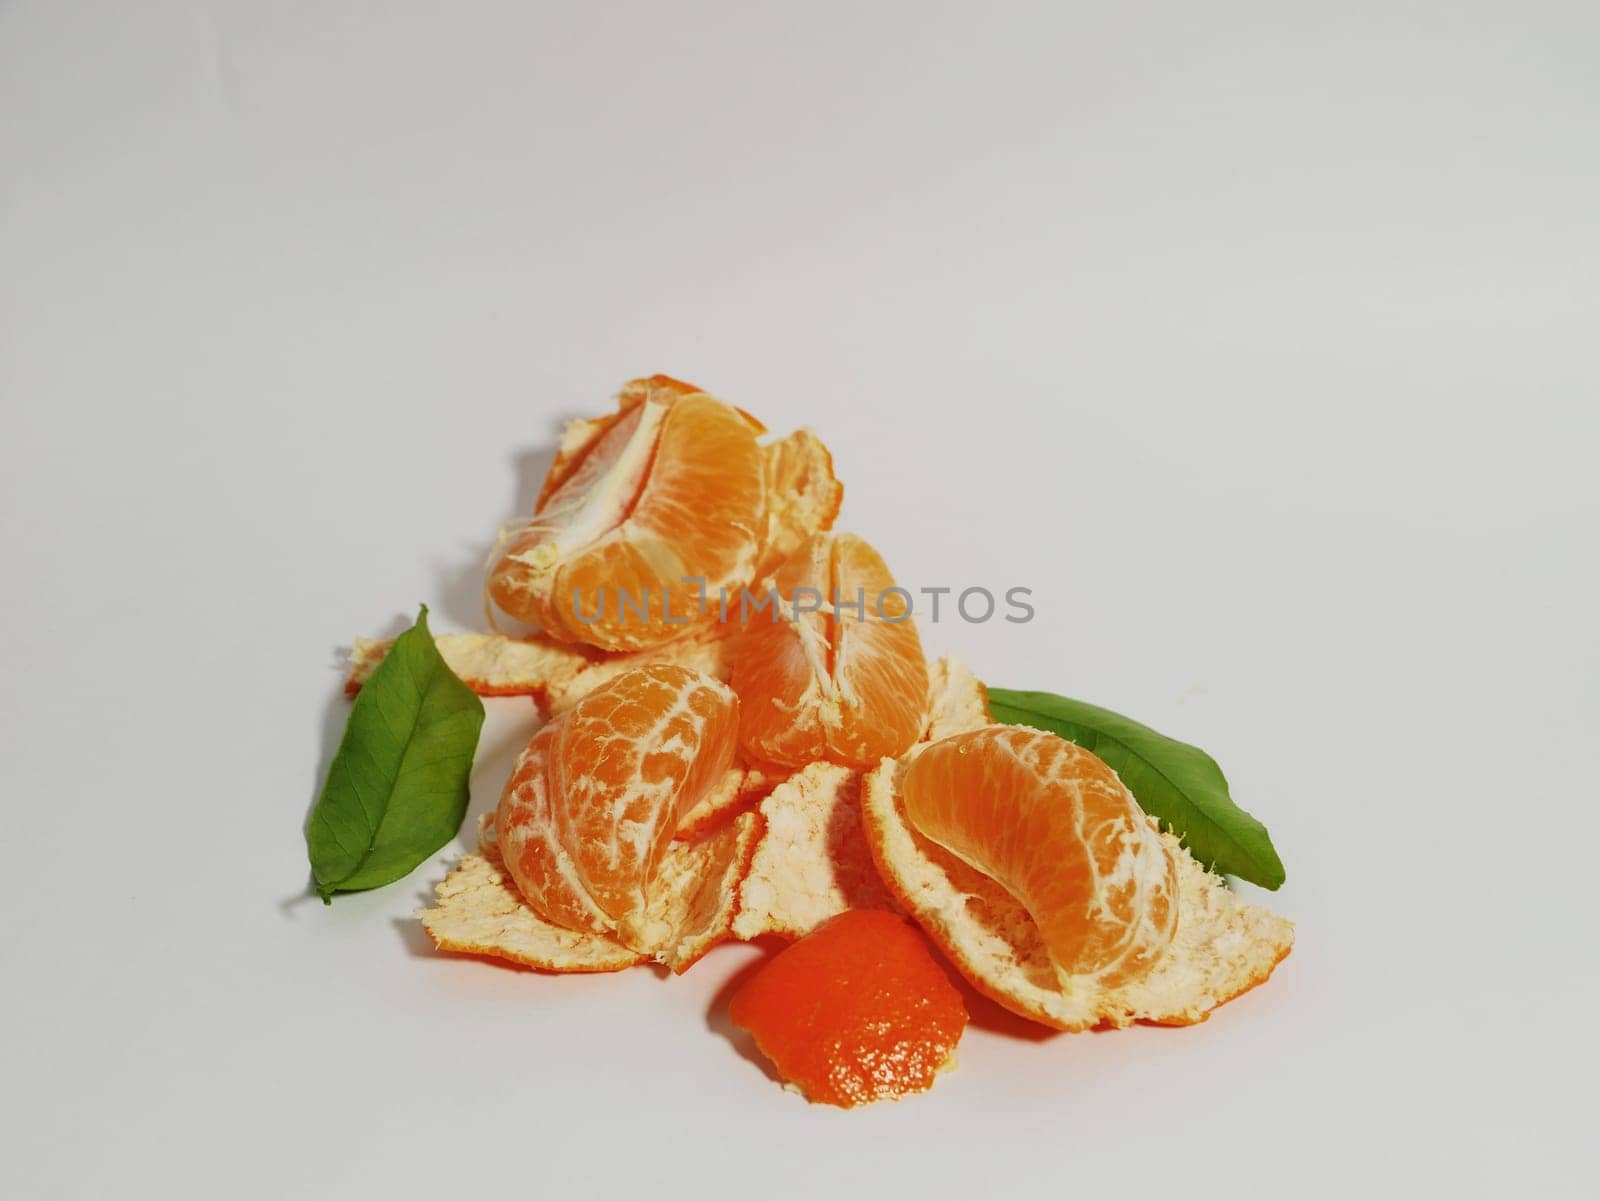 Fresh peeled tangerine and its peel on a white background. by gelog67